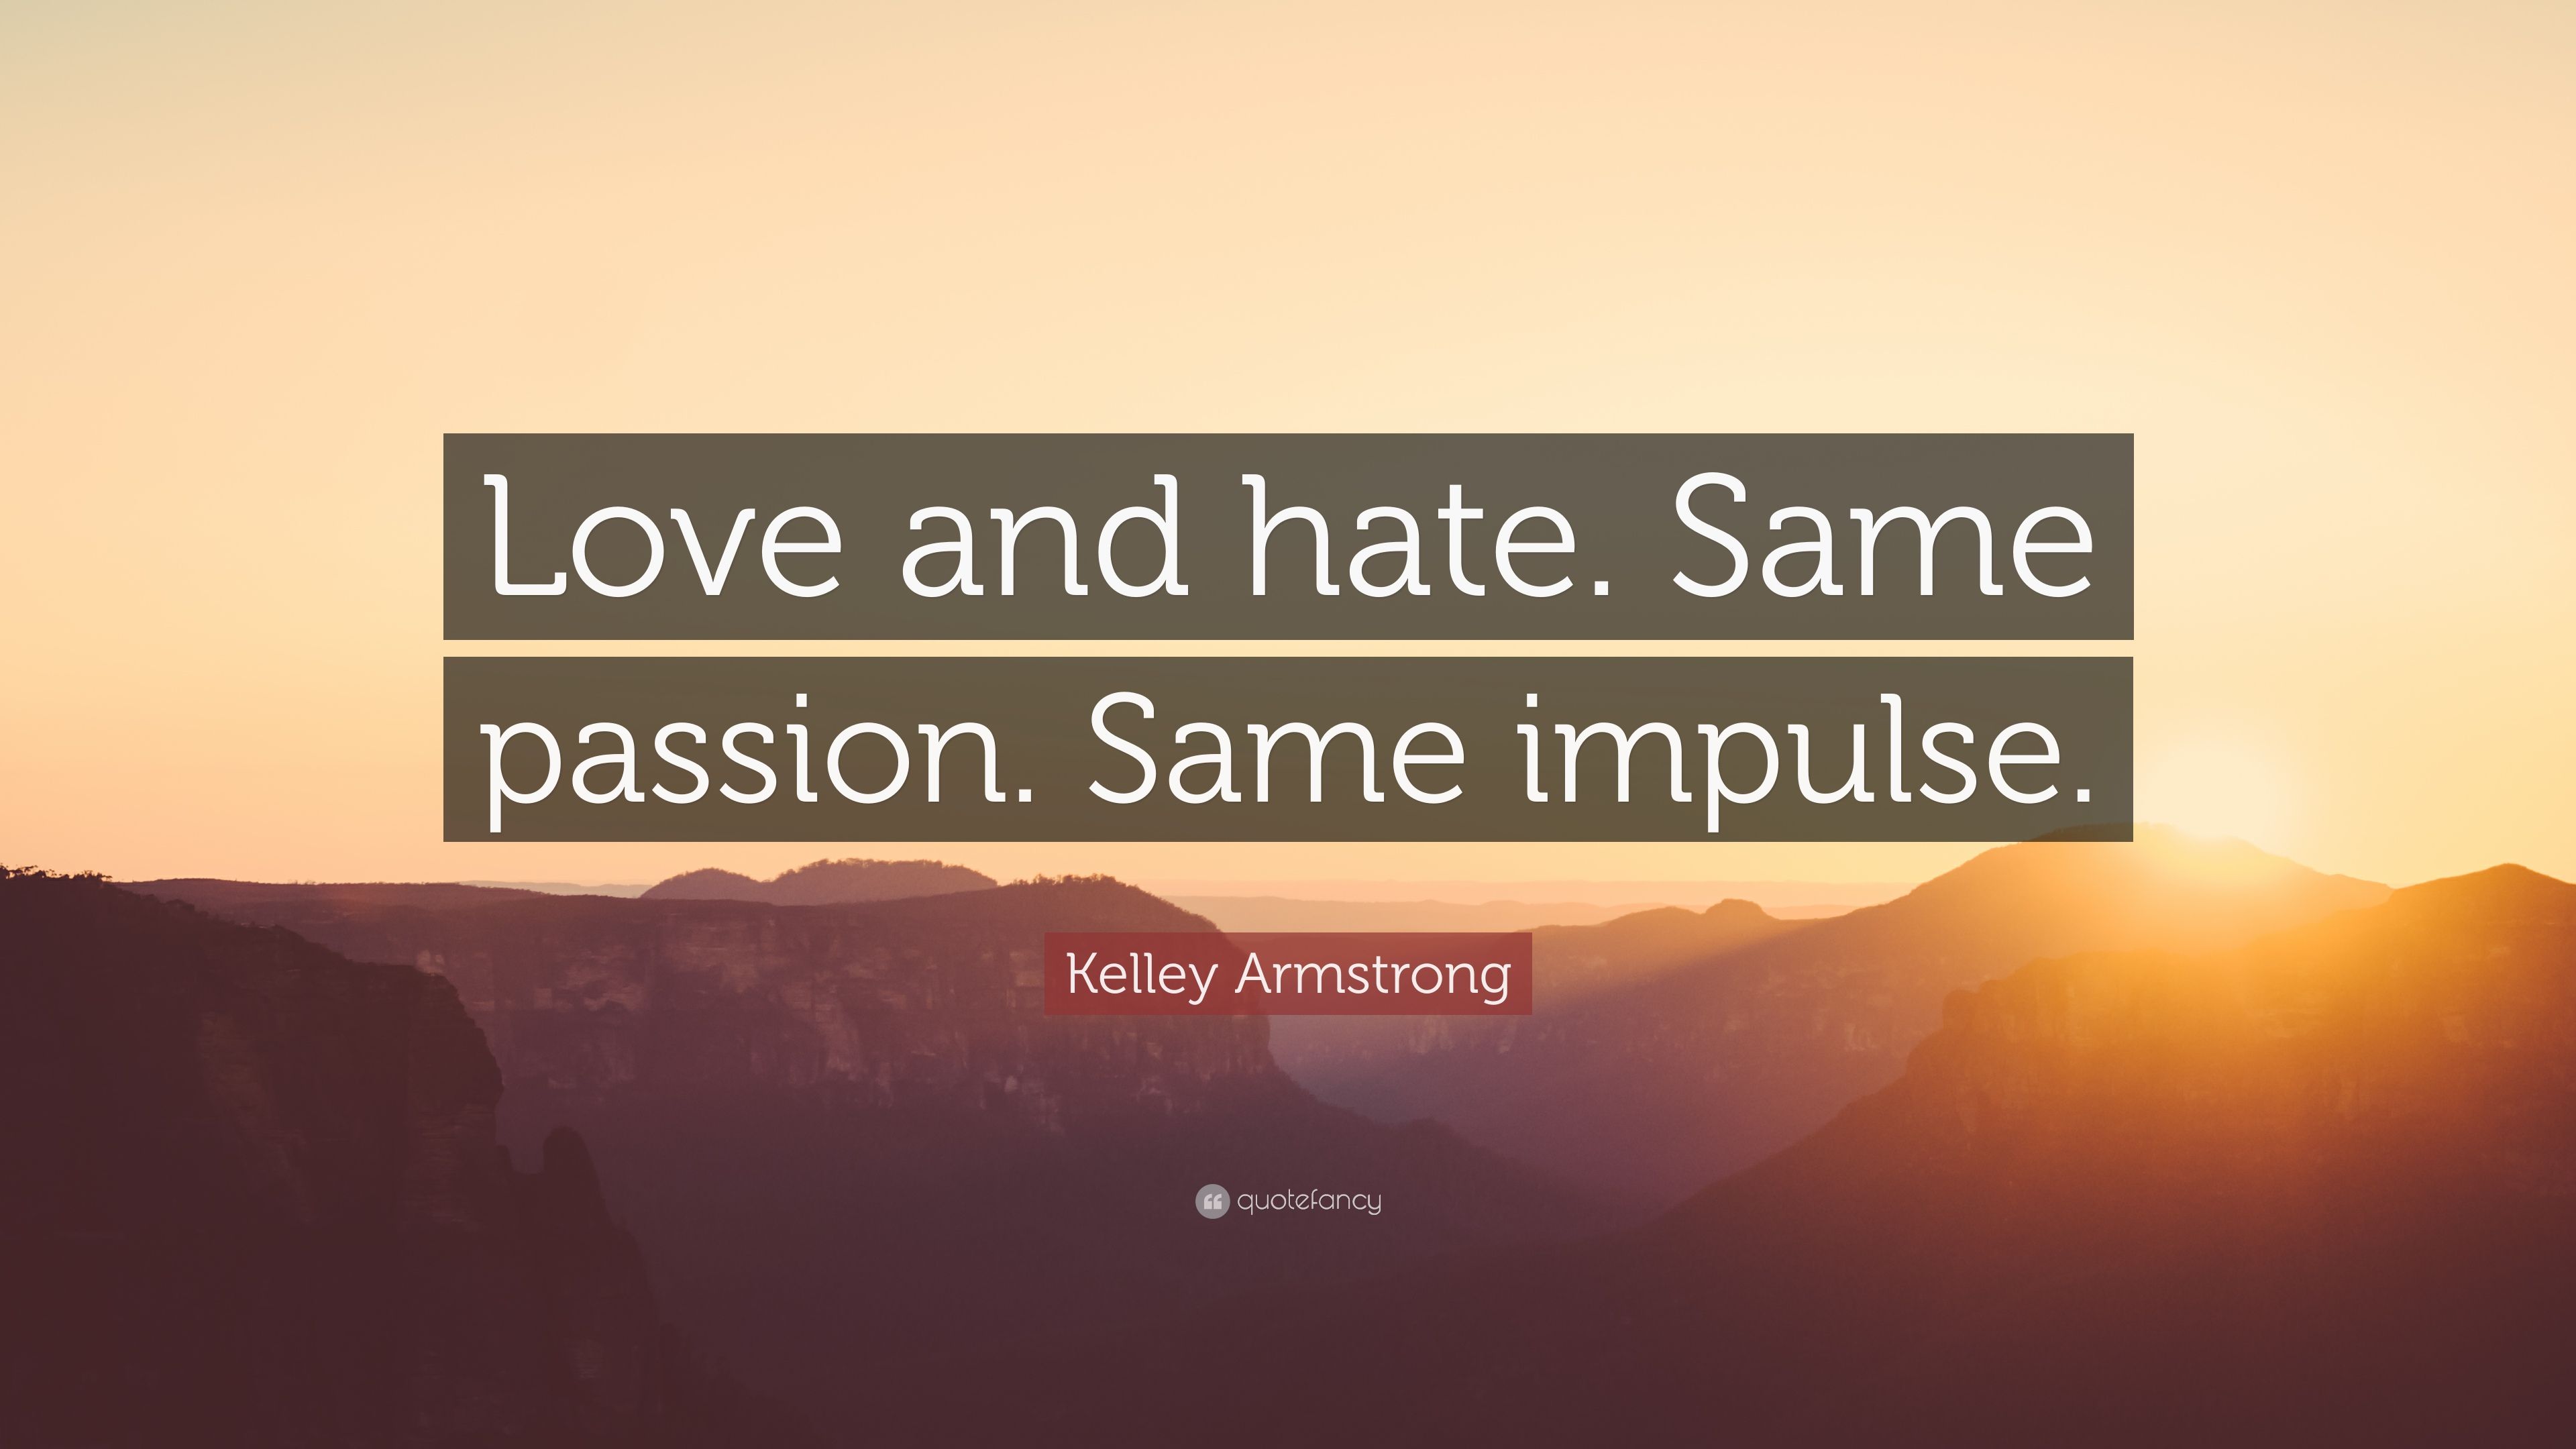 Kelley Armstrong Quote: “Love and hate. Same passion. Same impulse.” (7 wallpaper)